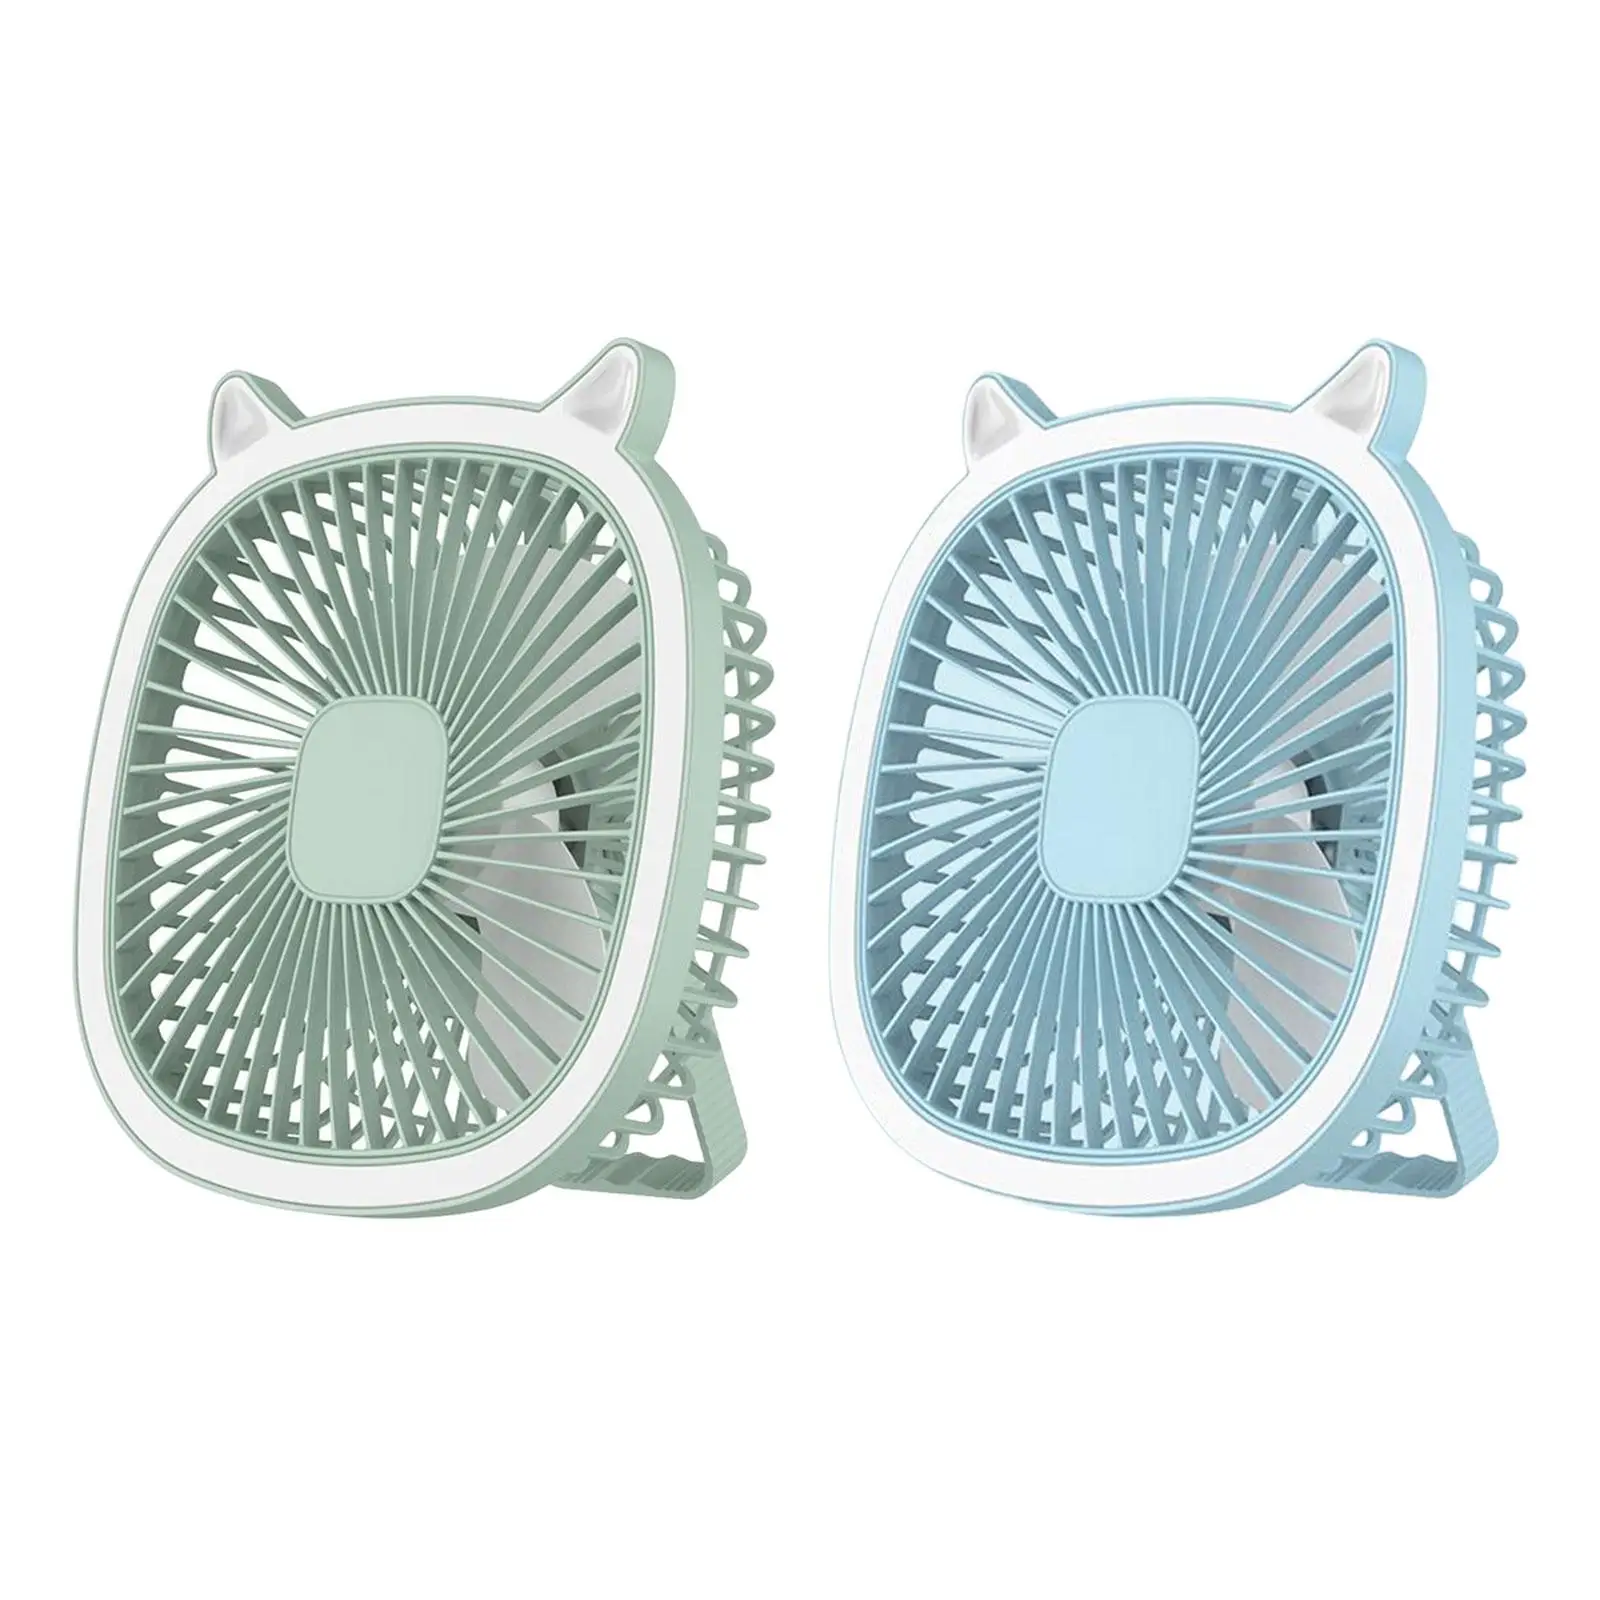 Portable Desk Fan Personal Table Cooling Fan with Lights for Car Home Office